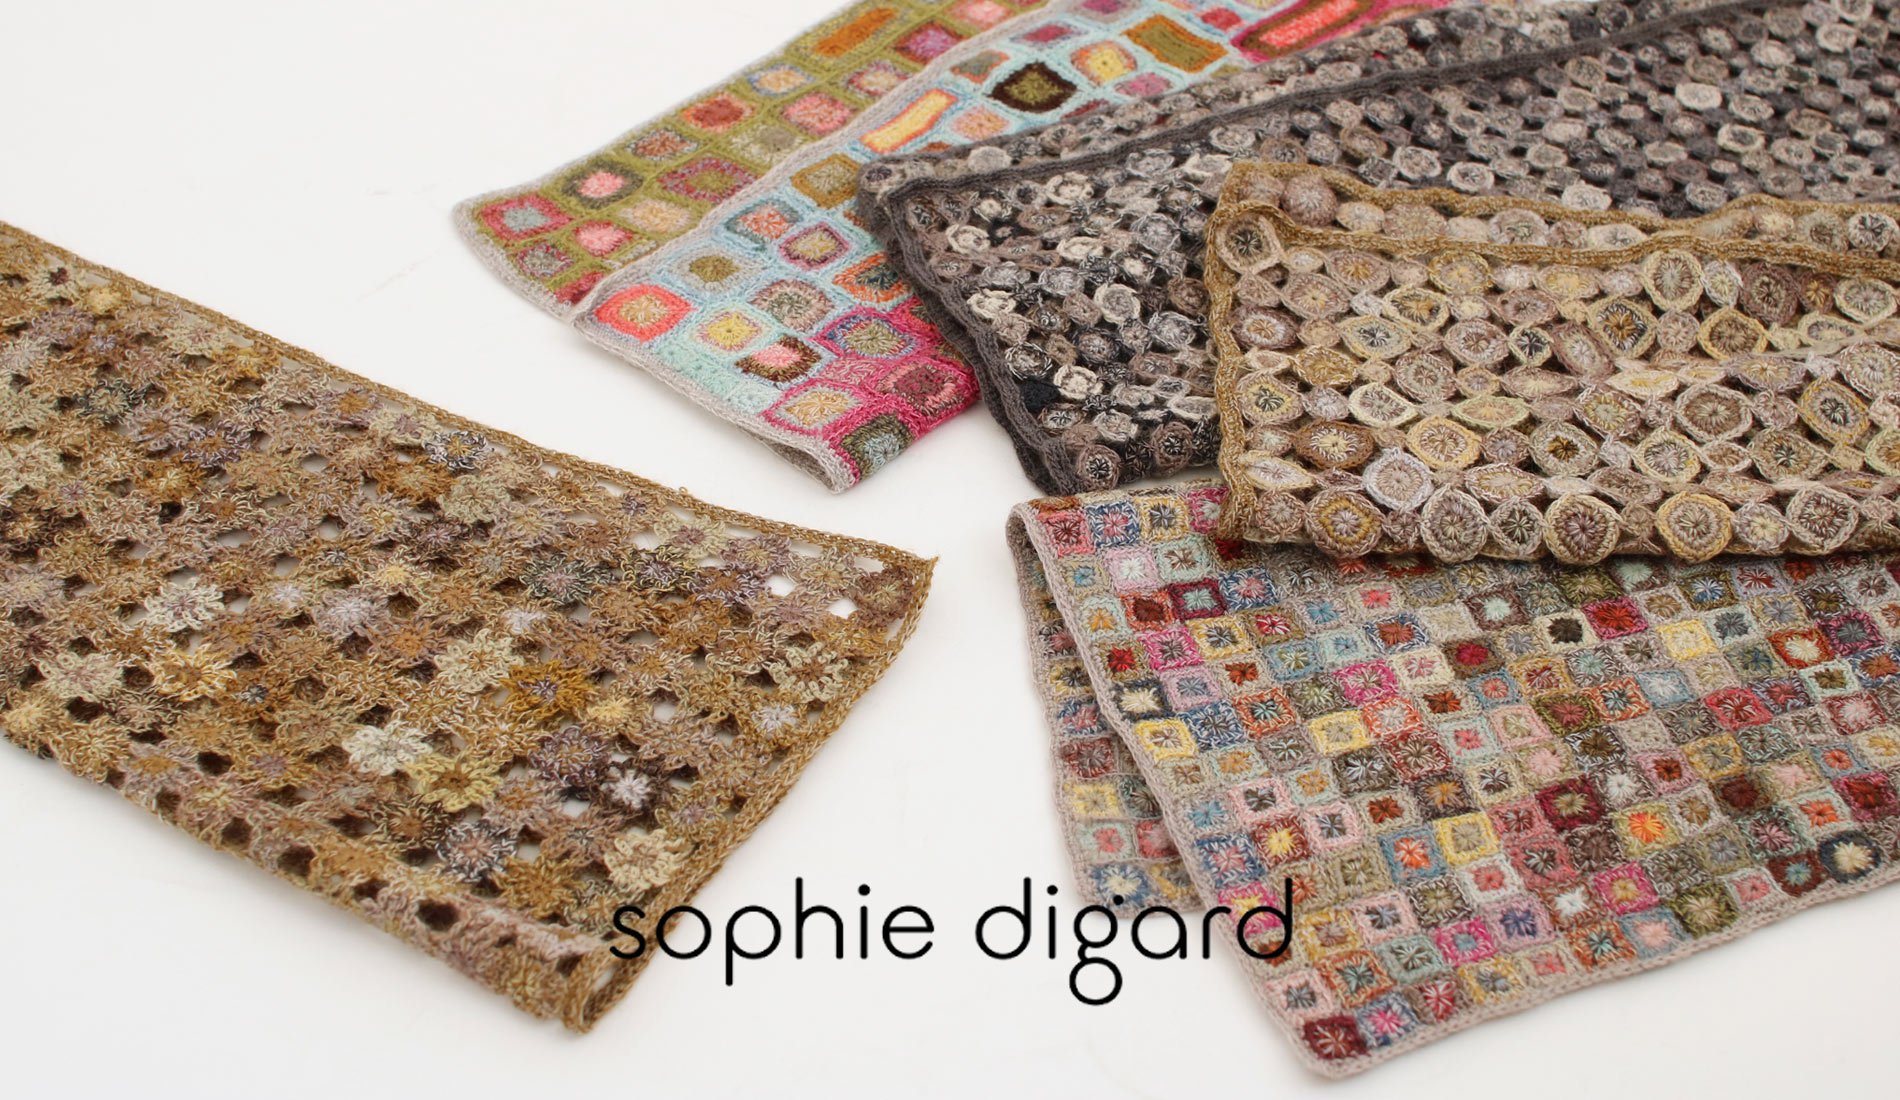 sophie digard